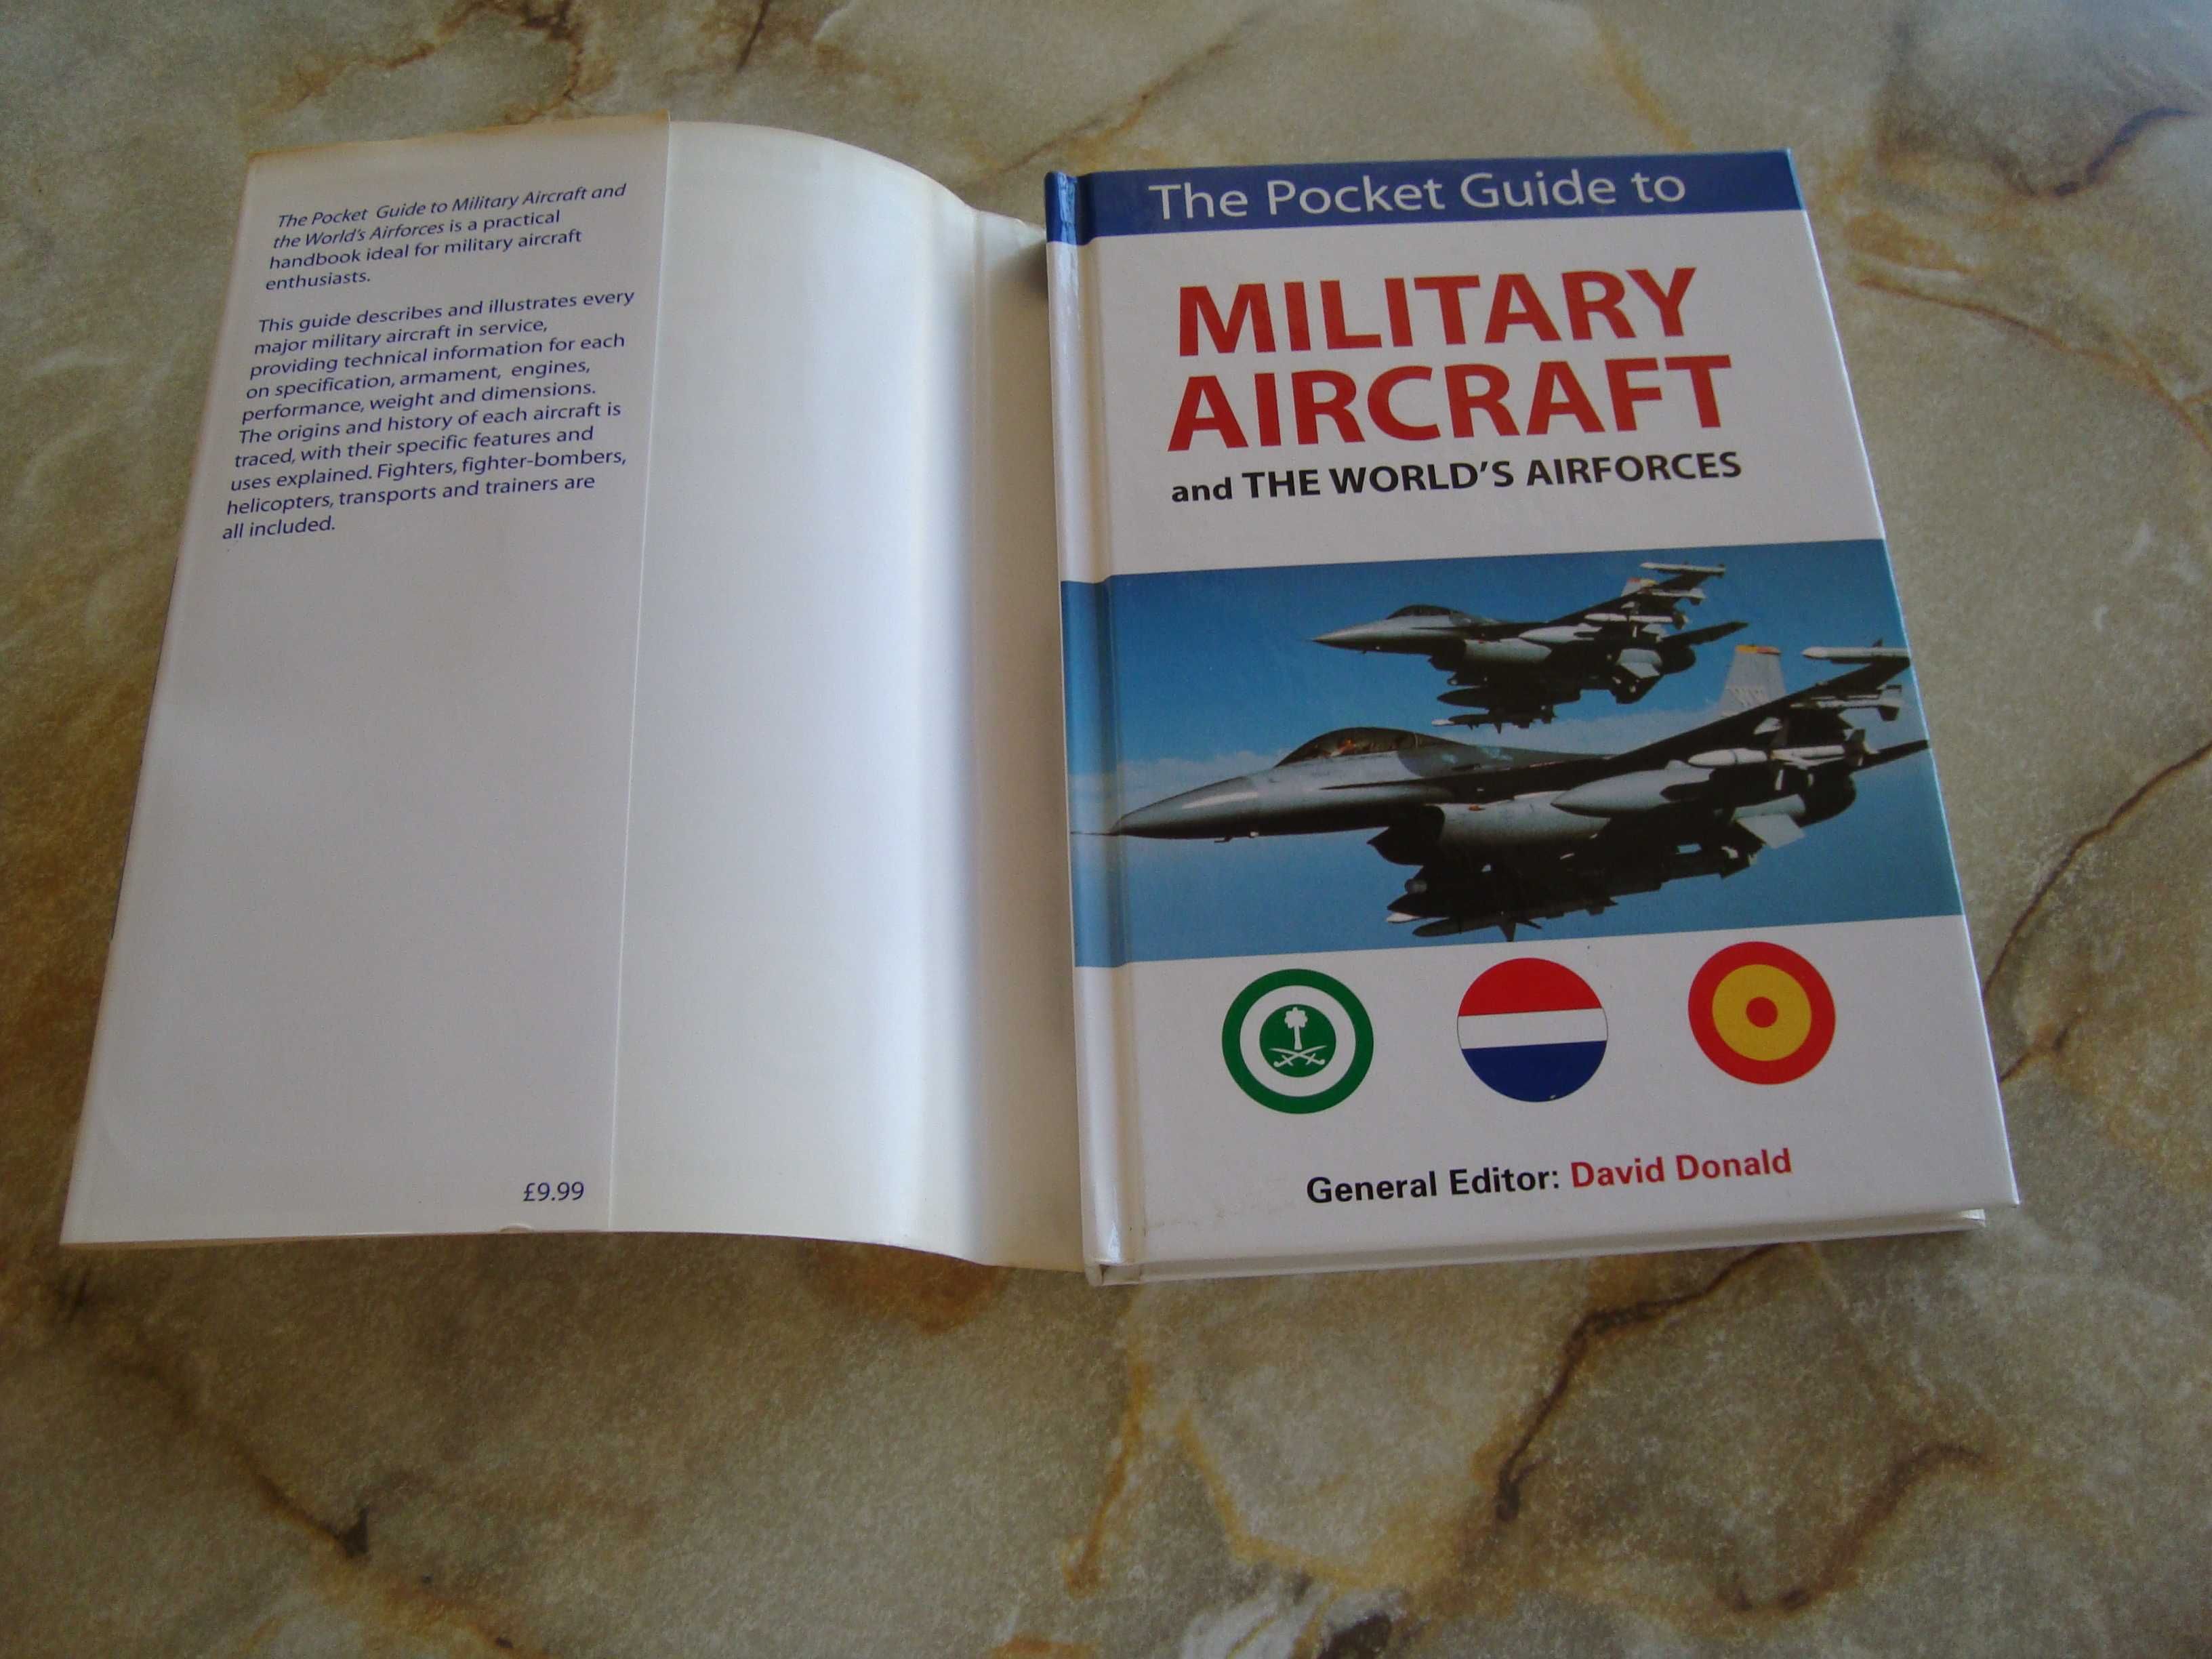 Livro "Military Aircraft and The World's Airforces"